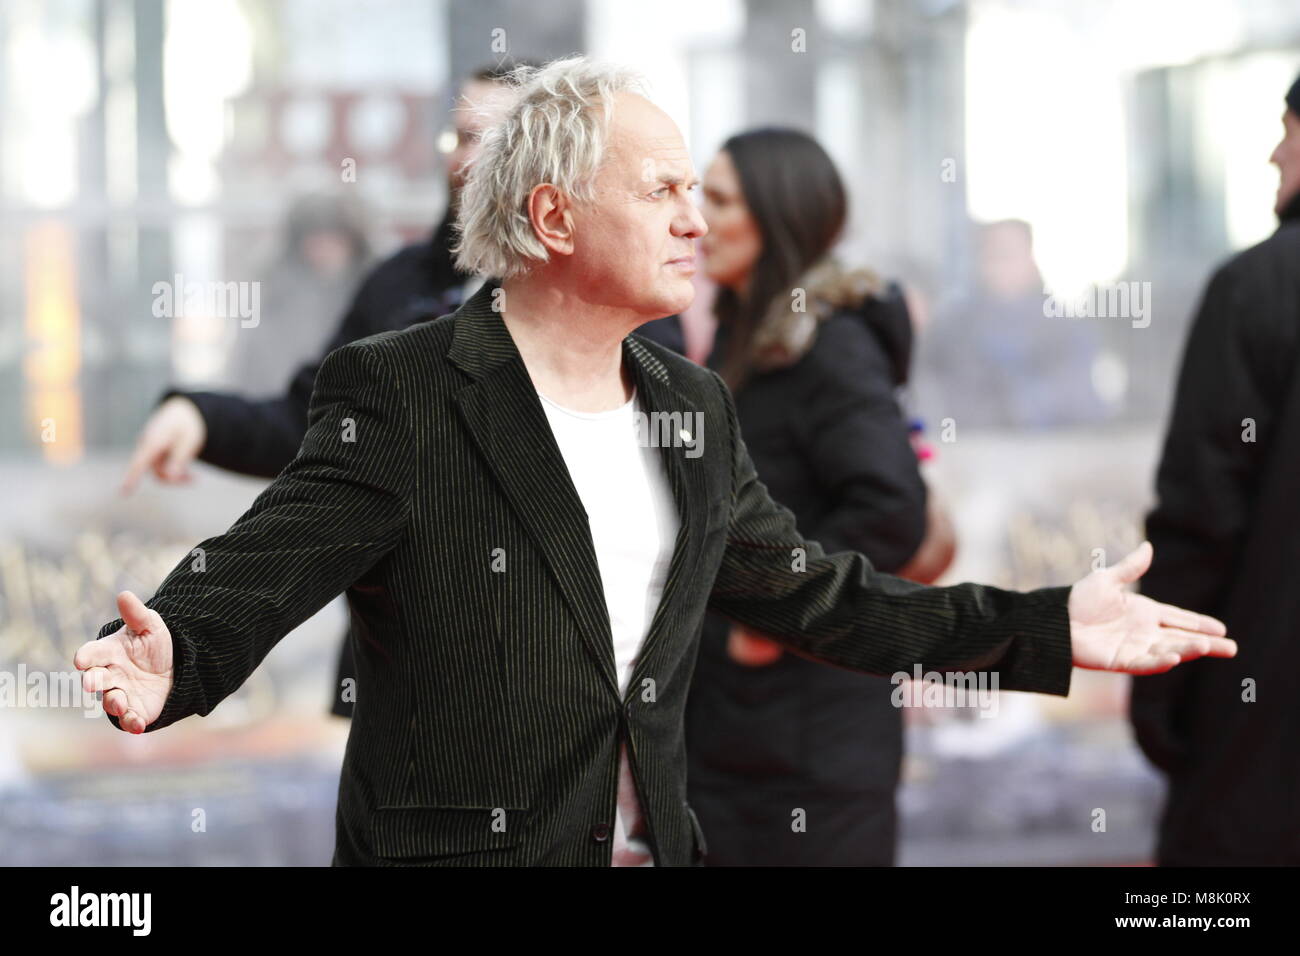 Berlin, Germany. 18th Mar, 2018. Berlin: The world premiere of 'Jim Knopf and Luke the locomotive driver' in front of the Sony Center on Potsdamer Platz. The photo shows the actor Uwe Ochsenknecht on the red carpet. Credit: Simone Kuhlmey/Pacific Press/Alamy Live News Stock Photo